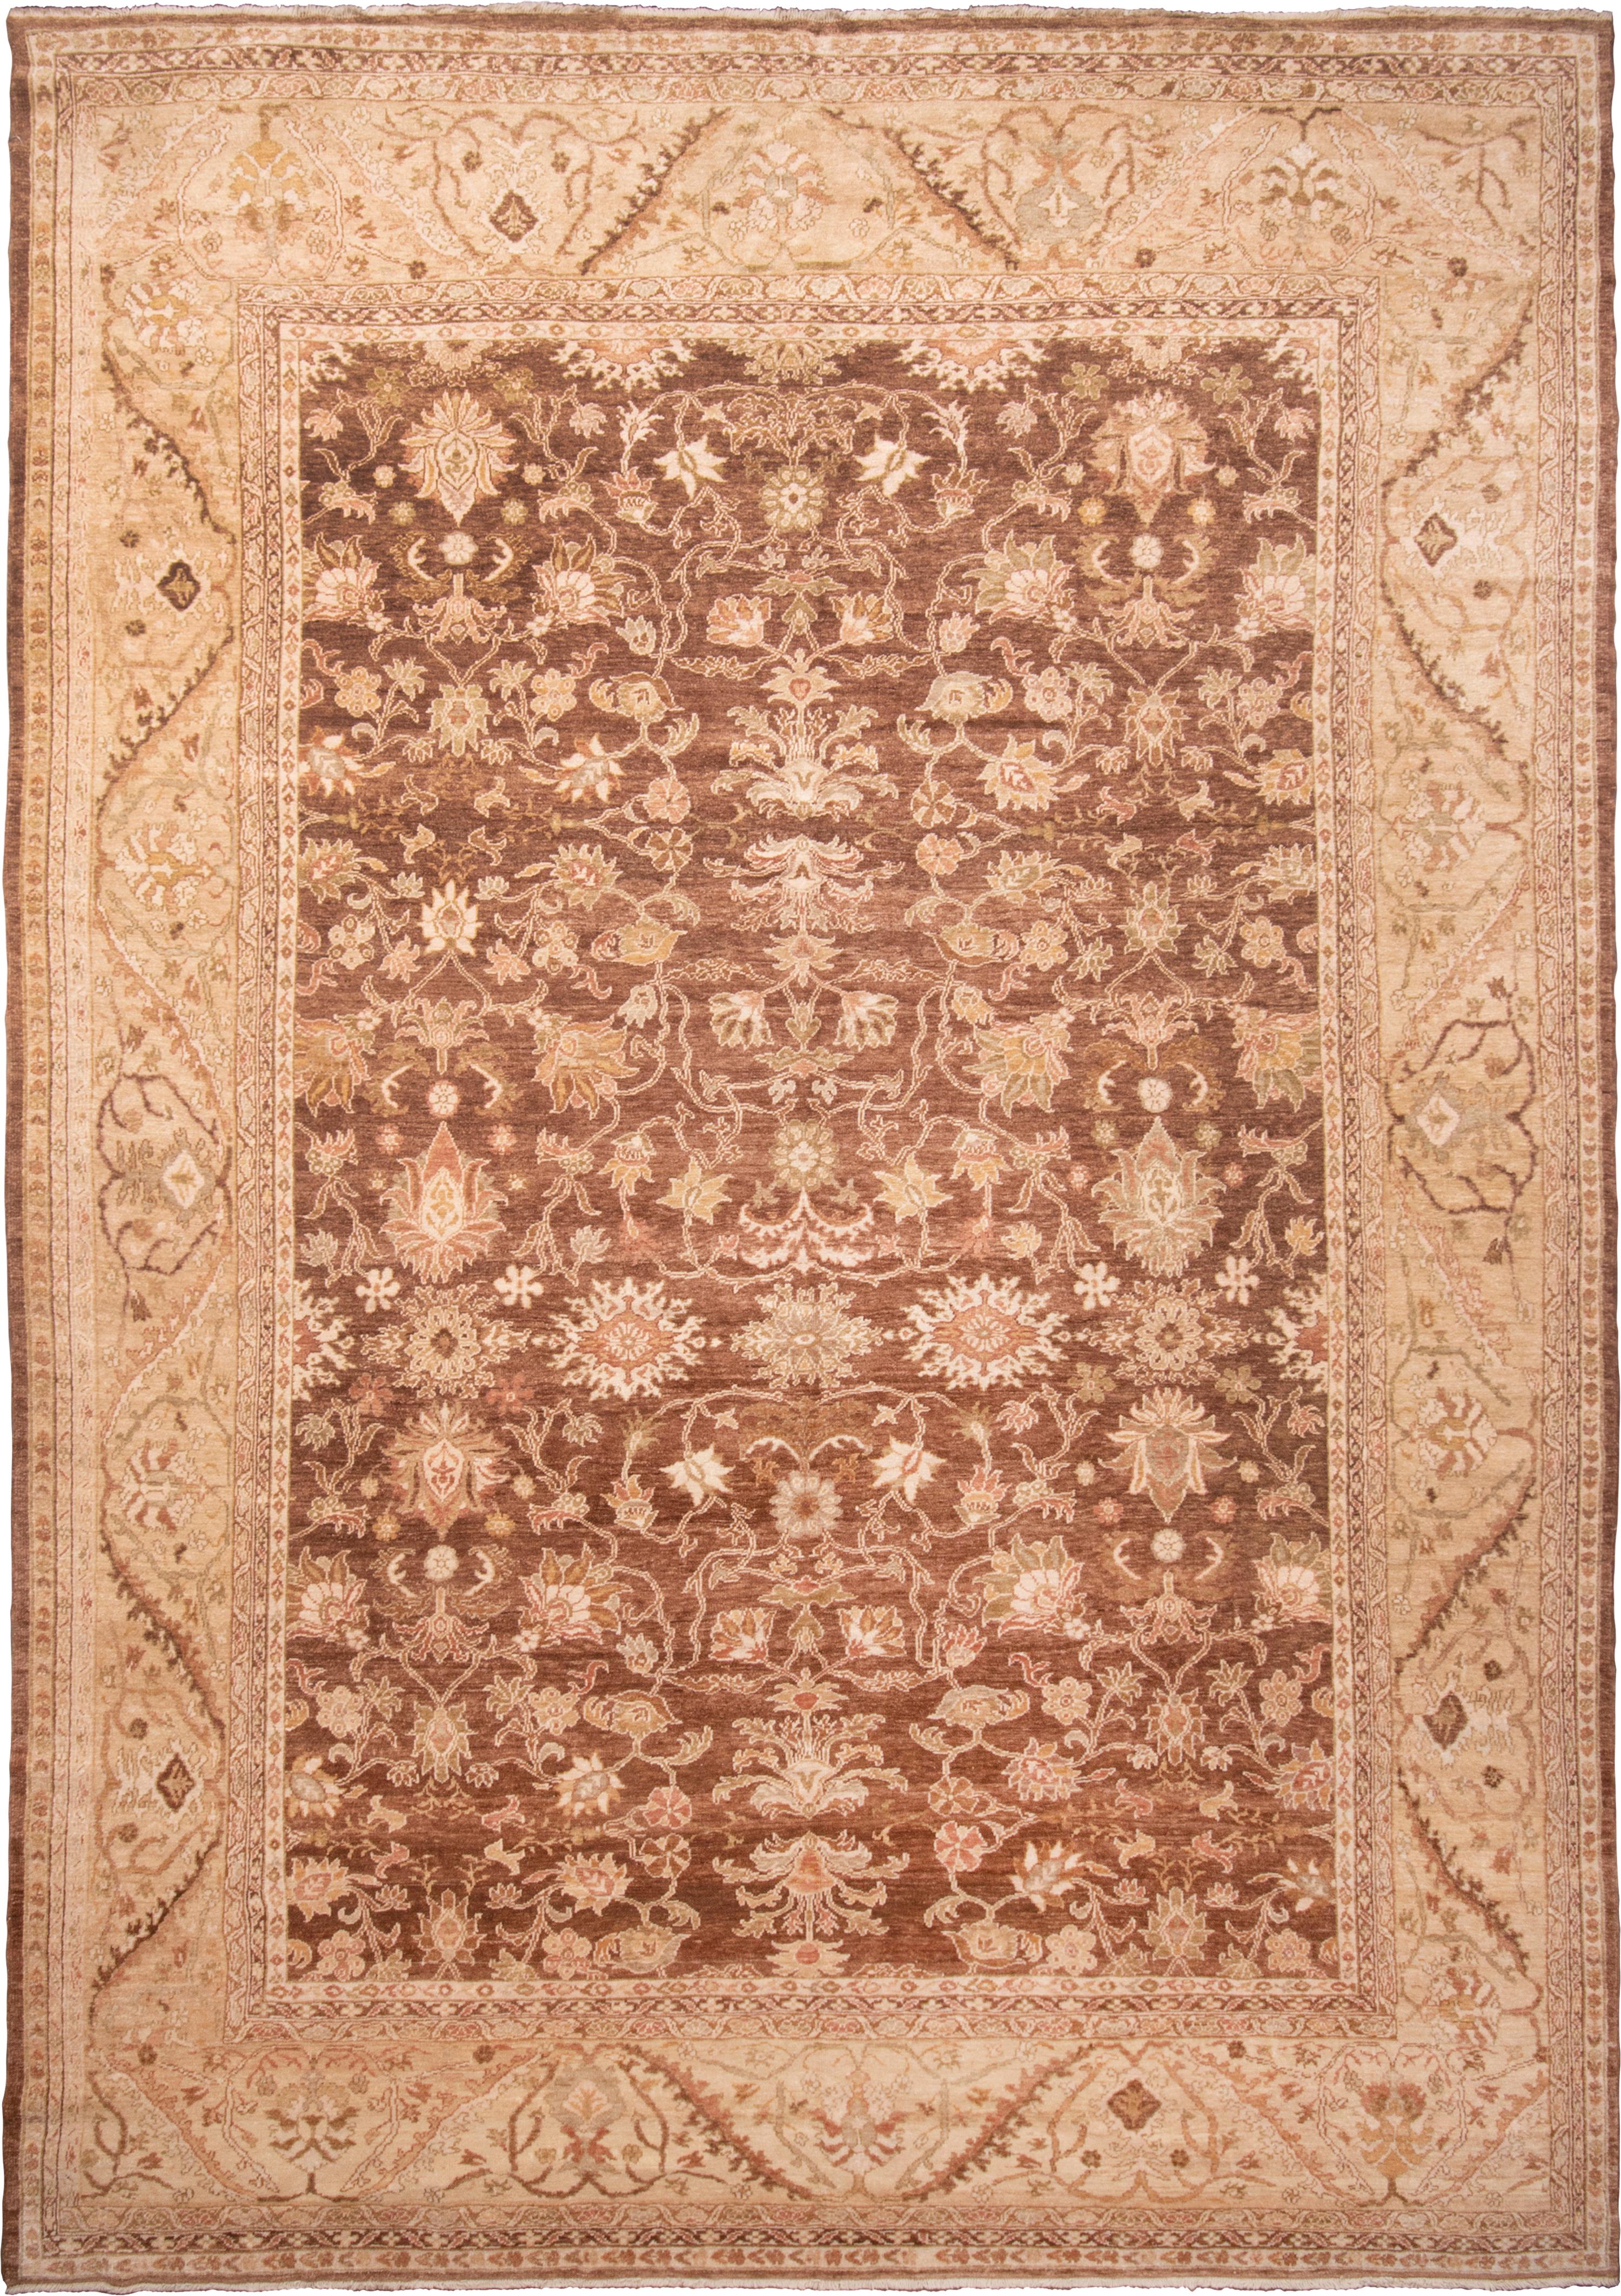 Originating from Turkey, this modern traditional Sultanabad rug enjoys several classic antique design elements with an uncommon color scheme. Hand knotted with mahal wool, much finer than normal wool creating an almost shimmering luster like that of